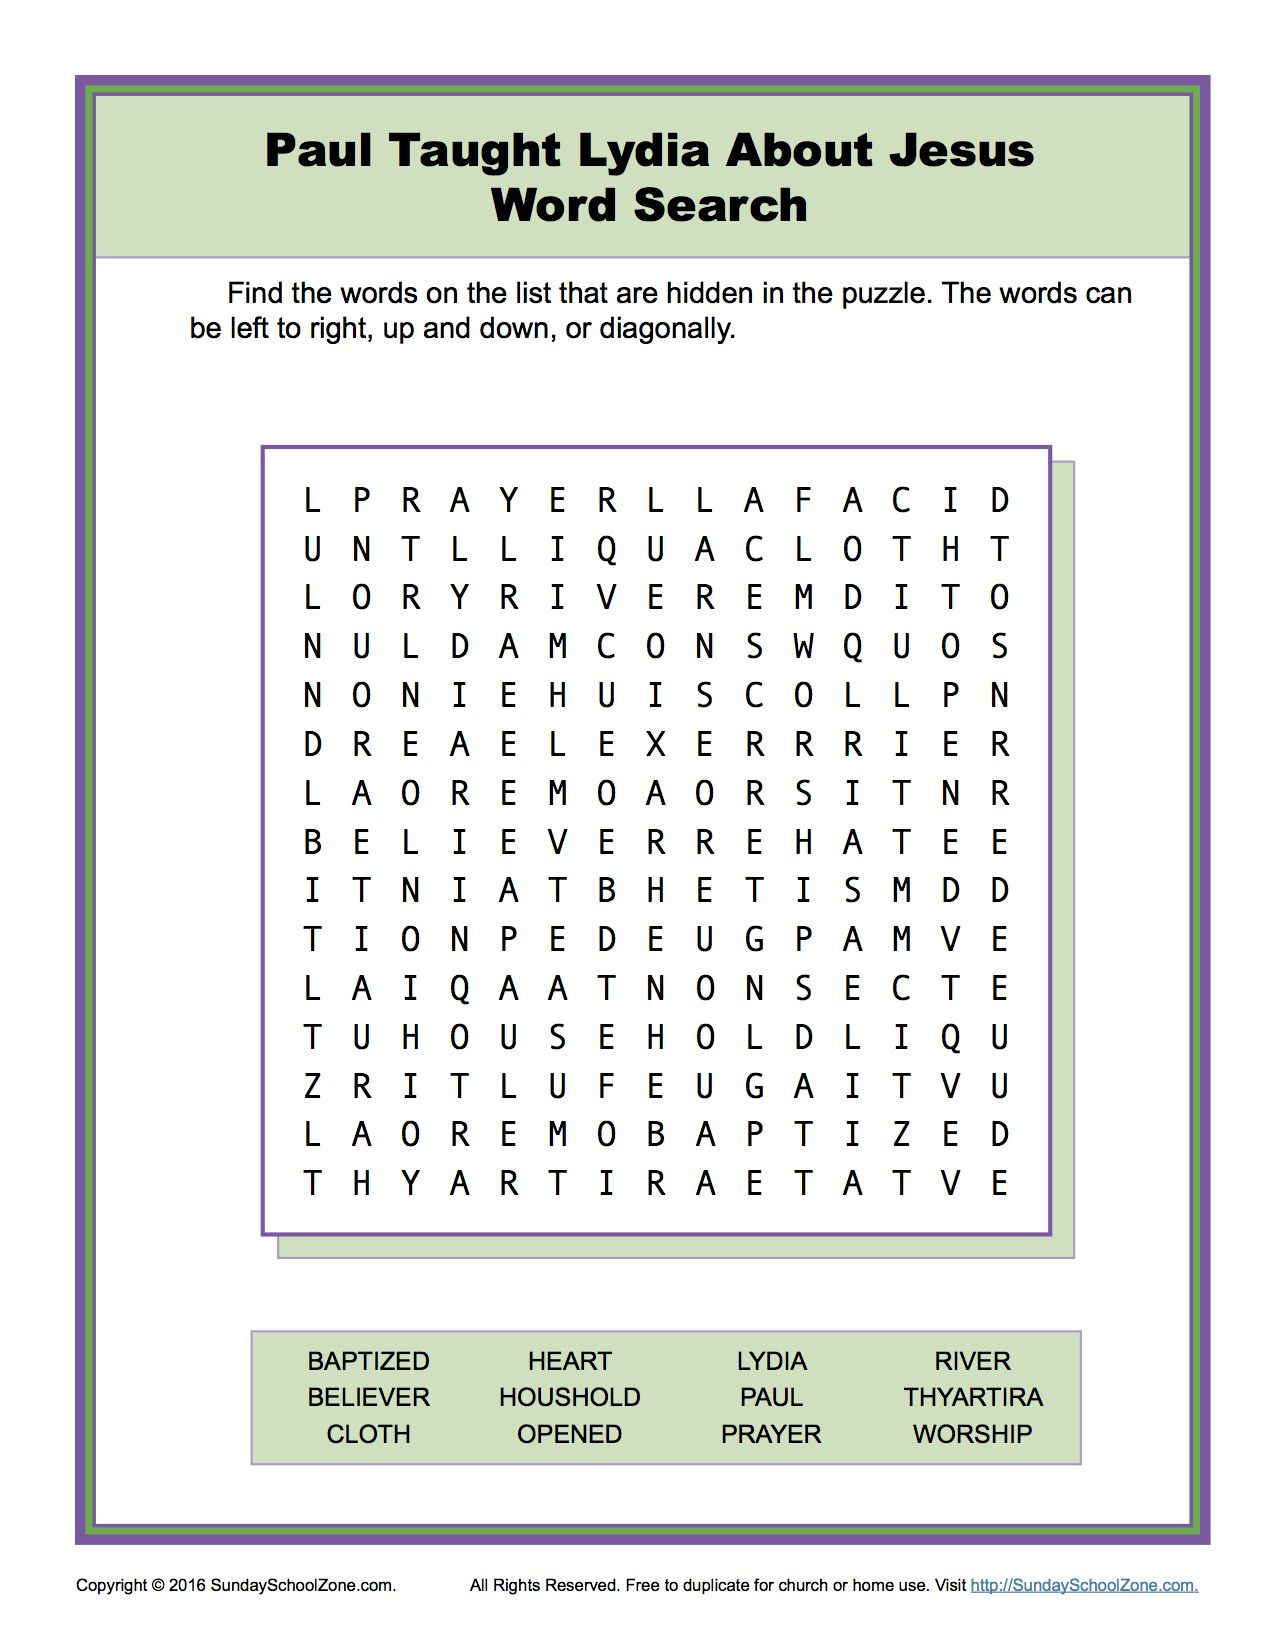 Paul Taught Lydia About Jesus Word Search | Sunday School